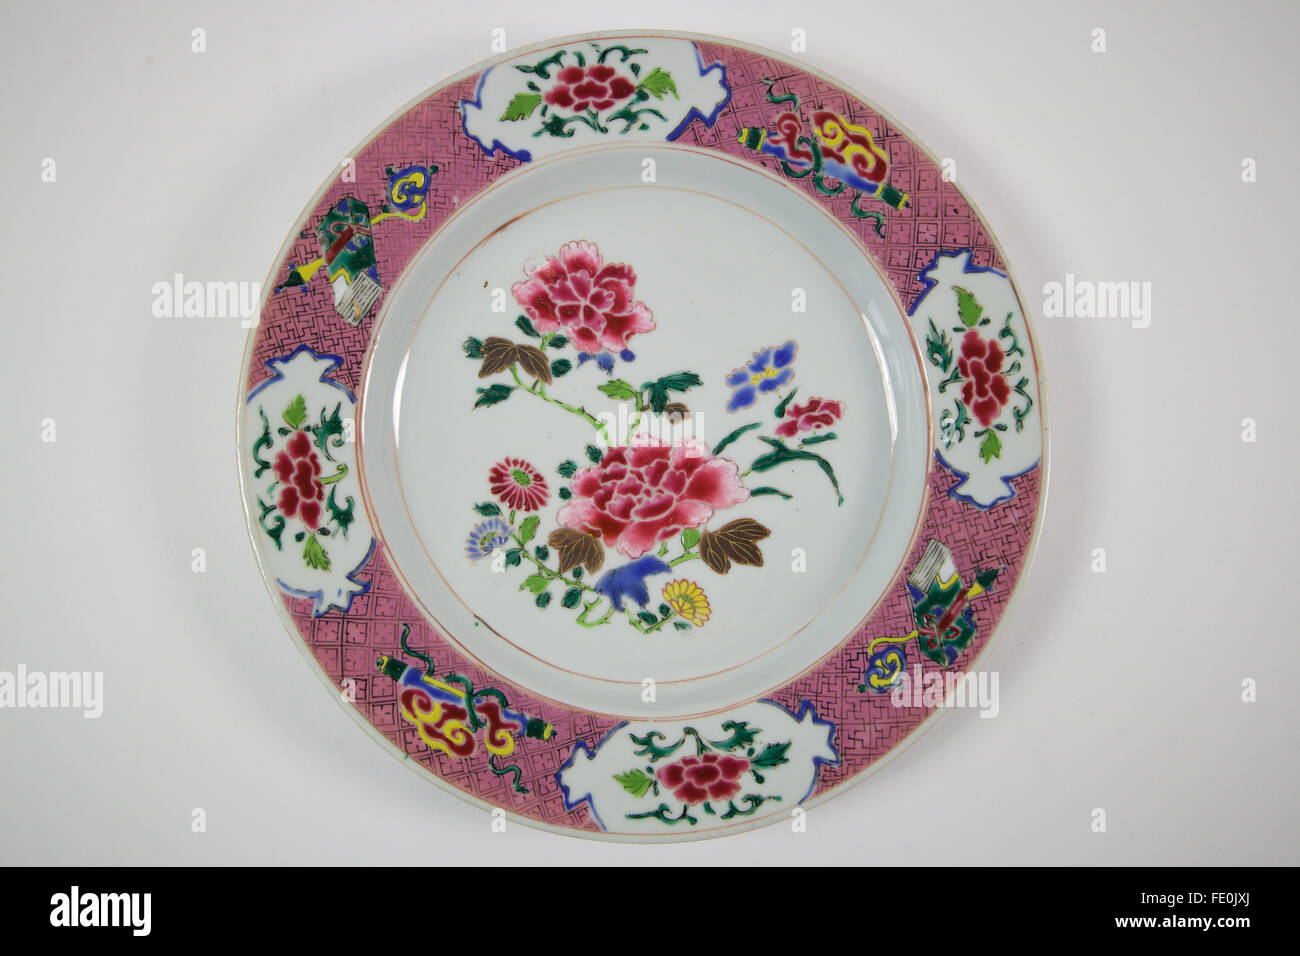 Vintage Chinese Export Peony Porcelain Plate